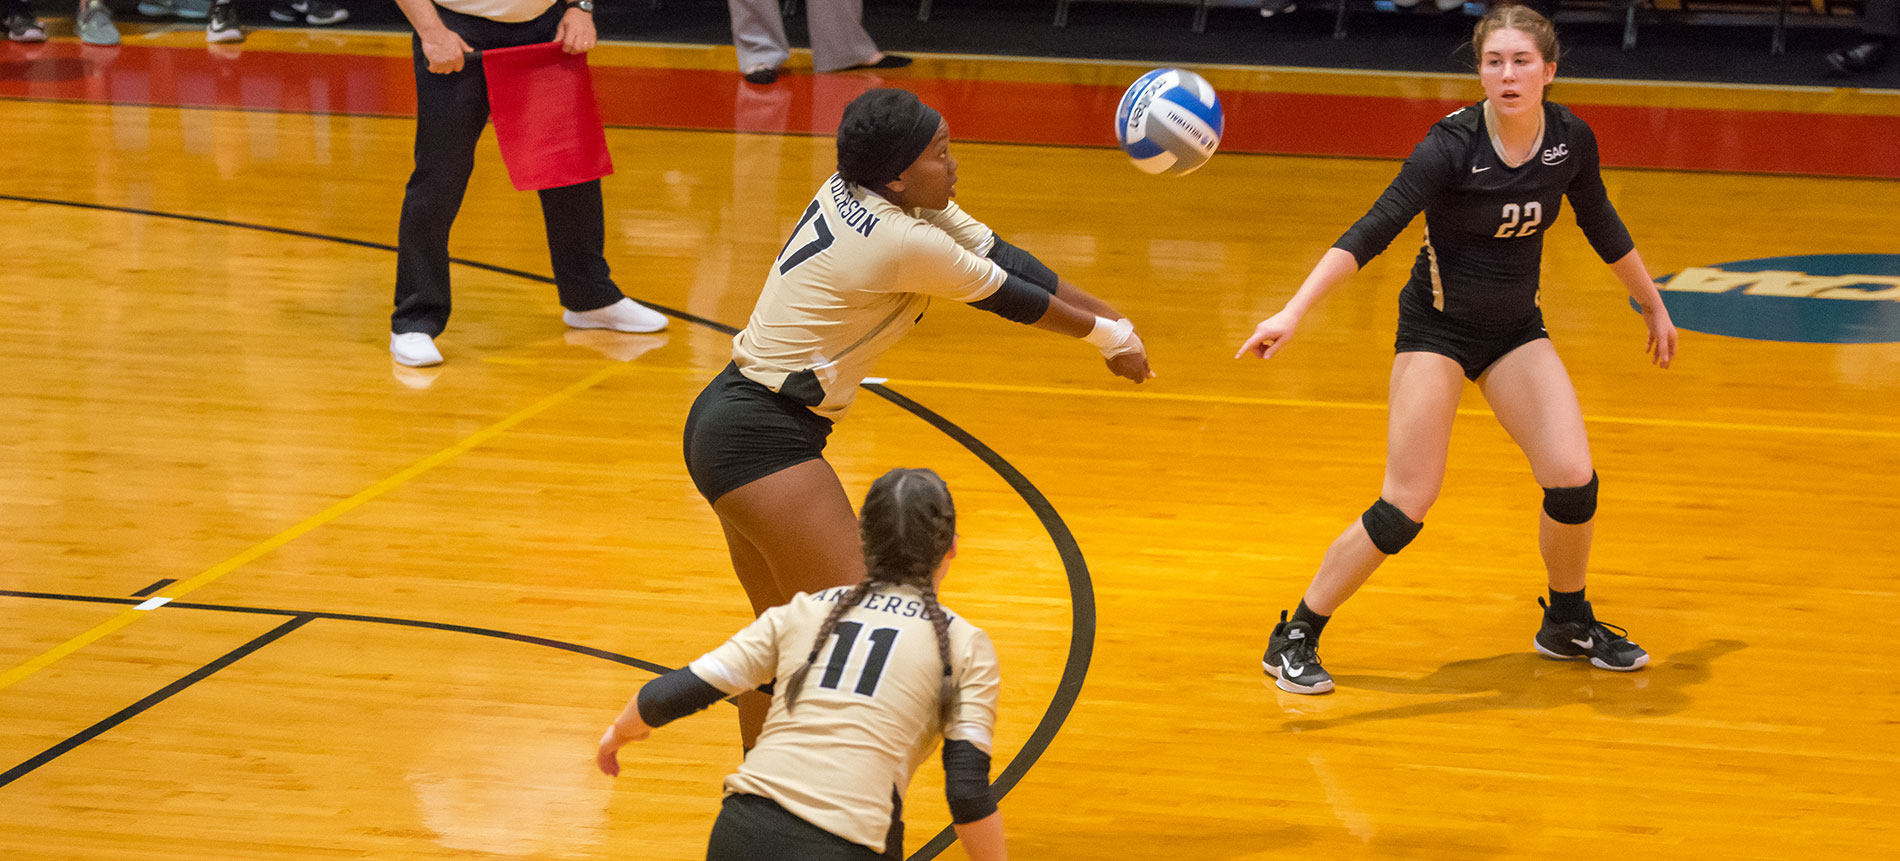 Trojans Sweep Francis Marion for Second Straight Win